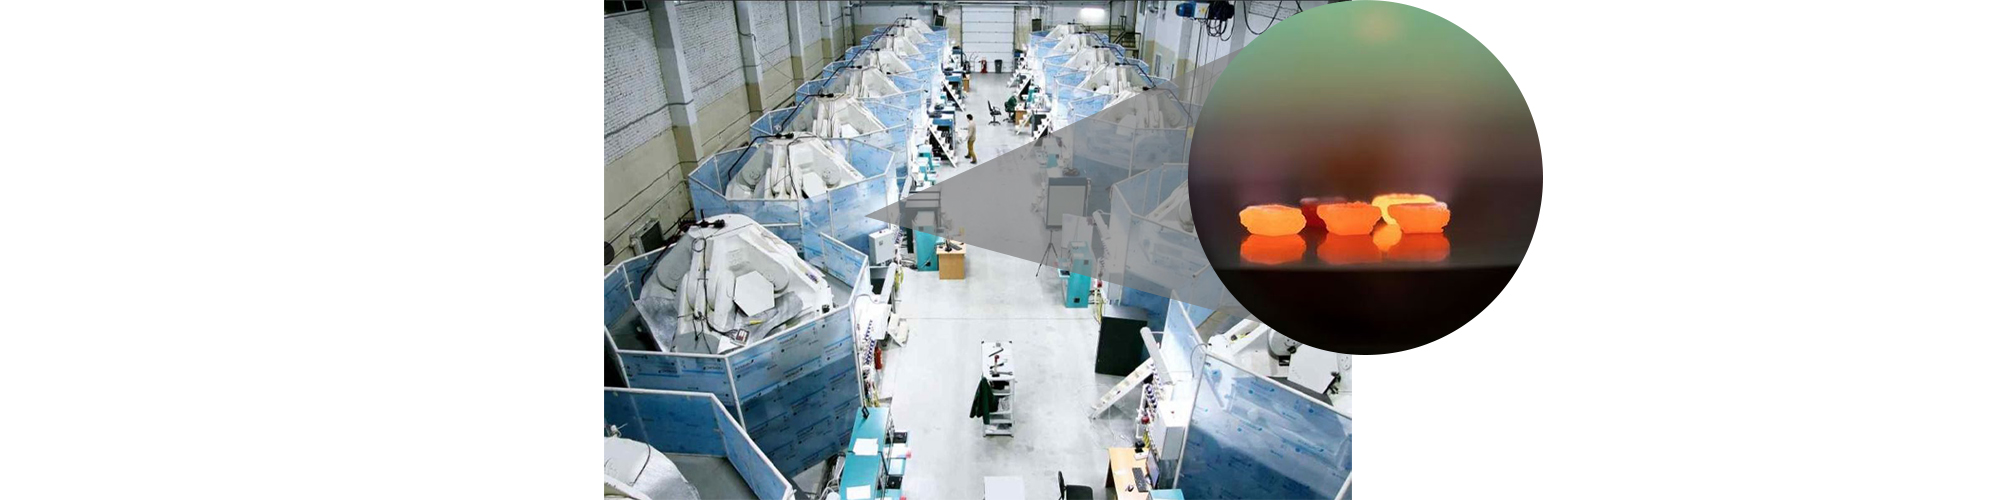 Image of laboratory where diamonds are grown and inset photo of diamonds under pressure and heat.